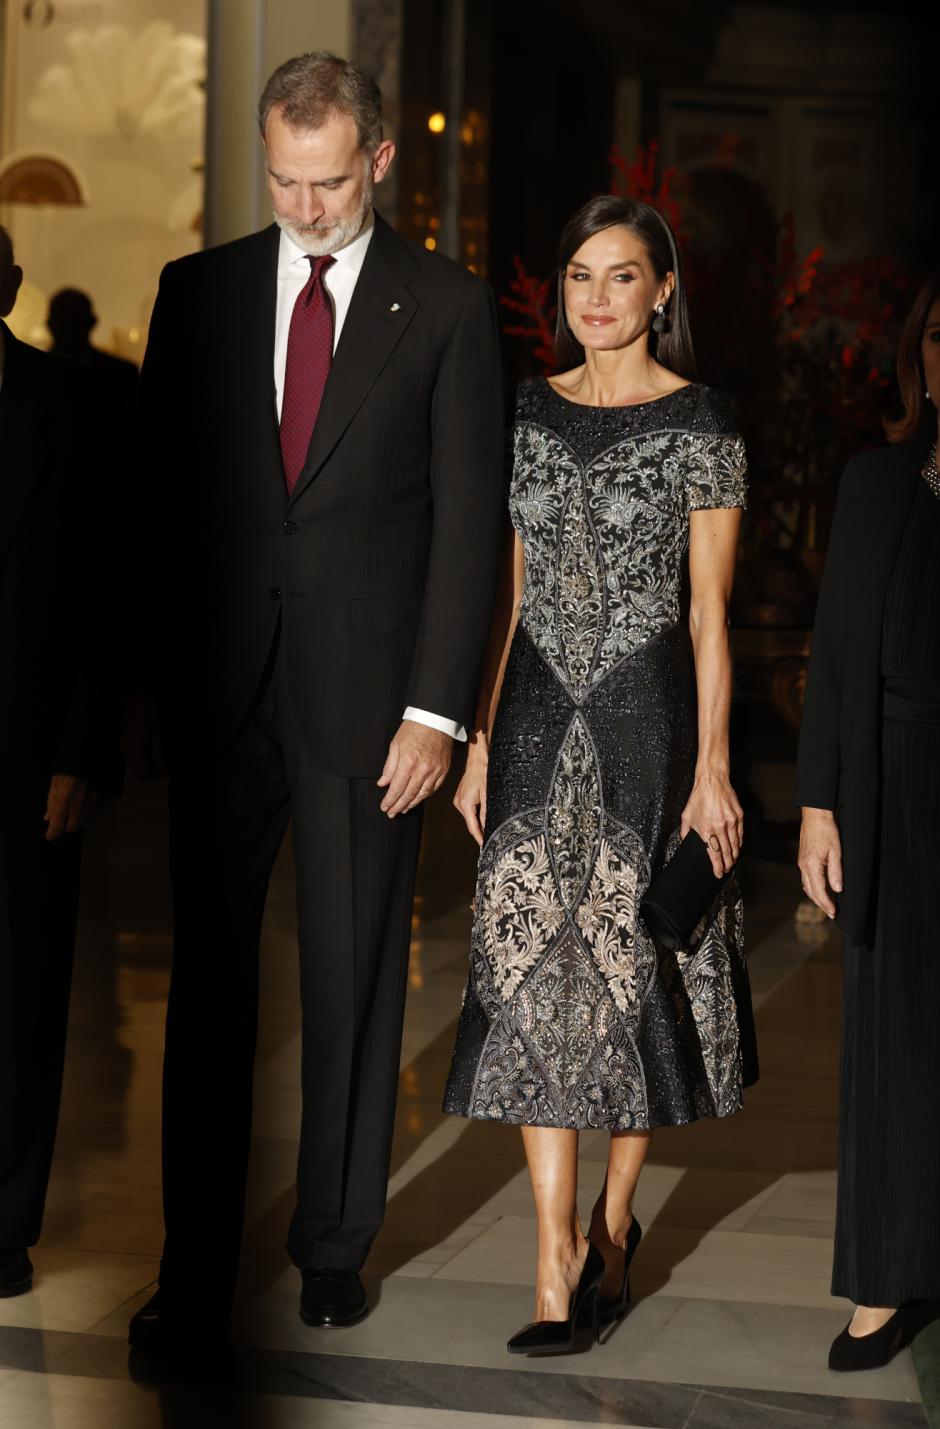 Kings Spain Felipe Vi,Queen Letizia during the 39 edition of the Journalist Award "Francisco Cerecedo" in Madrid on Tuesday, 29 November 2022.